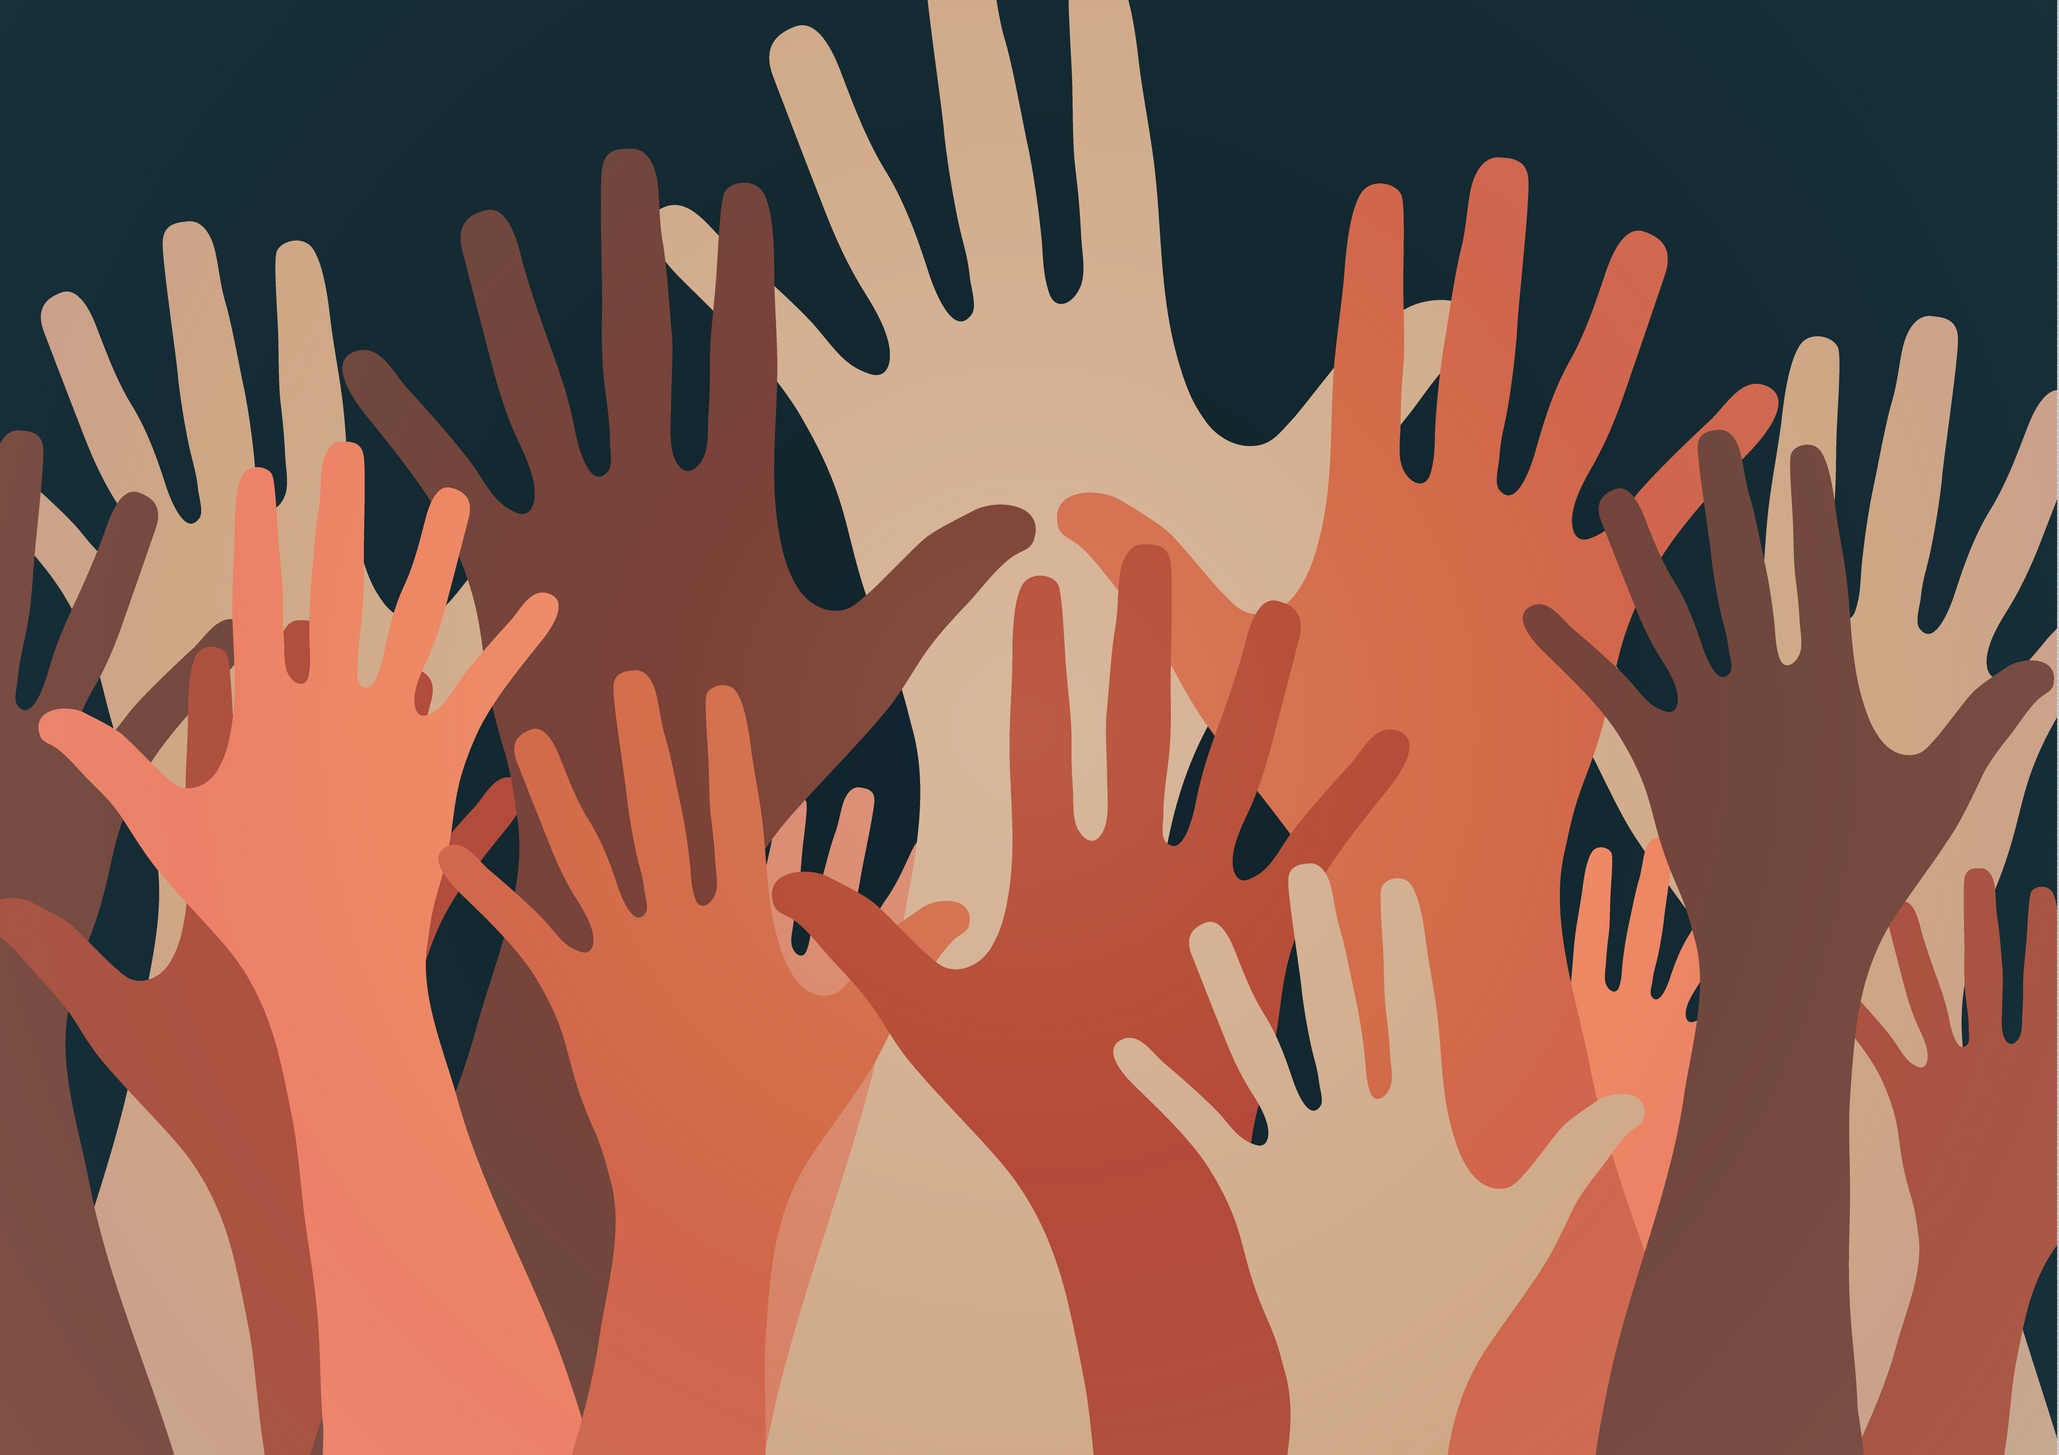 Illustration of hands raising up used in an issue of Equality: Temple Beth El of Boca Raton's Racial Equity newsletter